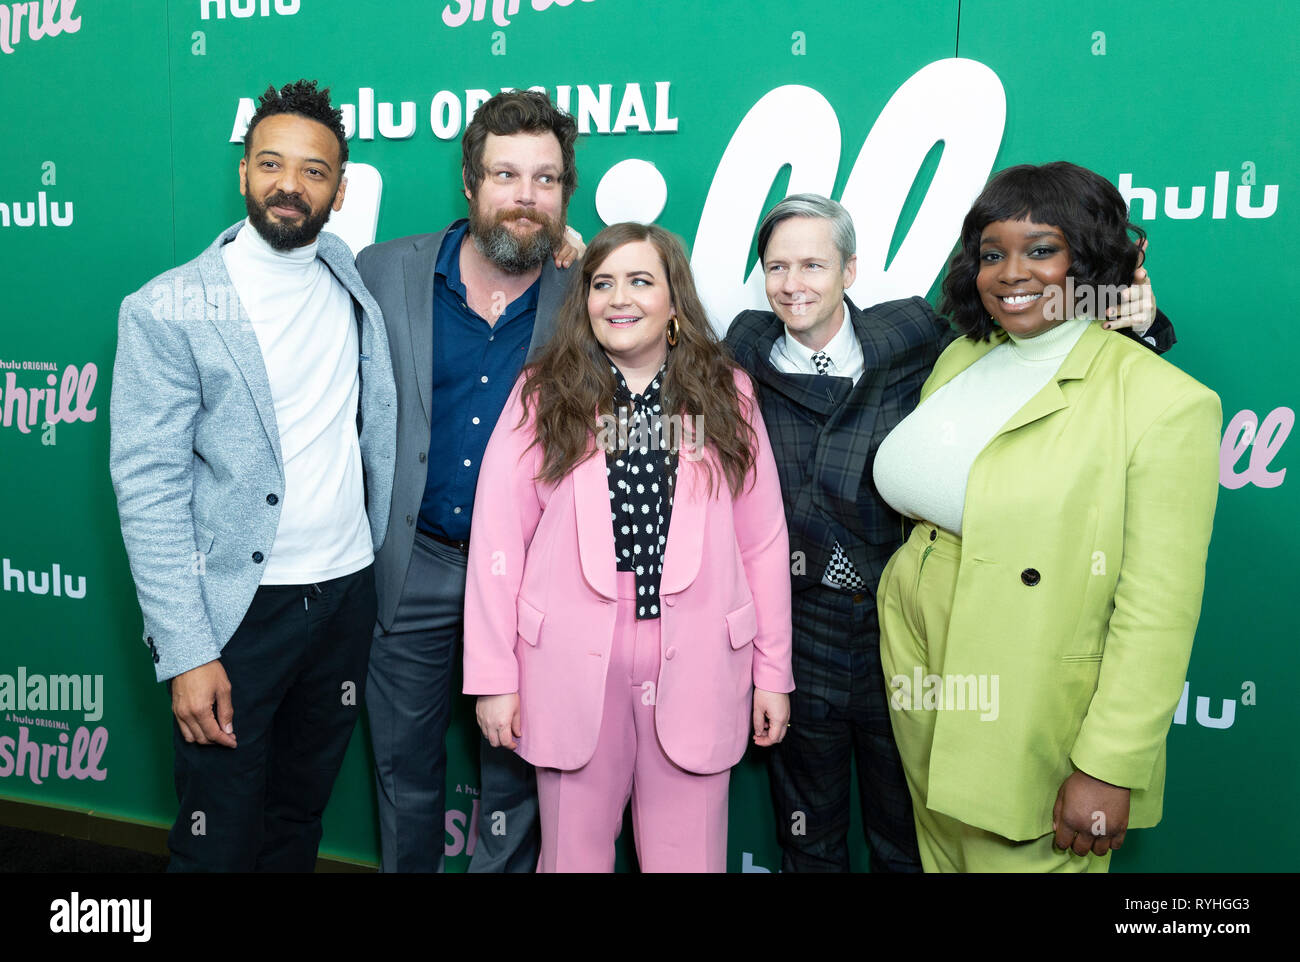 New York, United States. 13th Mar, 2019. New York, NY - March 13, 2019: Ian Owens, Luka Jones, Aidy Bryant, John Cameron Mitchell, Lolly Adefope attends New York Hulu Shrill premiere screening at Walter Reade Theater of Lincoln Center Credit: lev radin/Alamy Live News Stock Photo